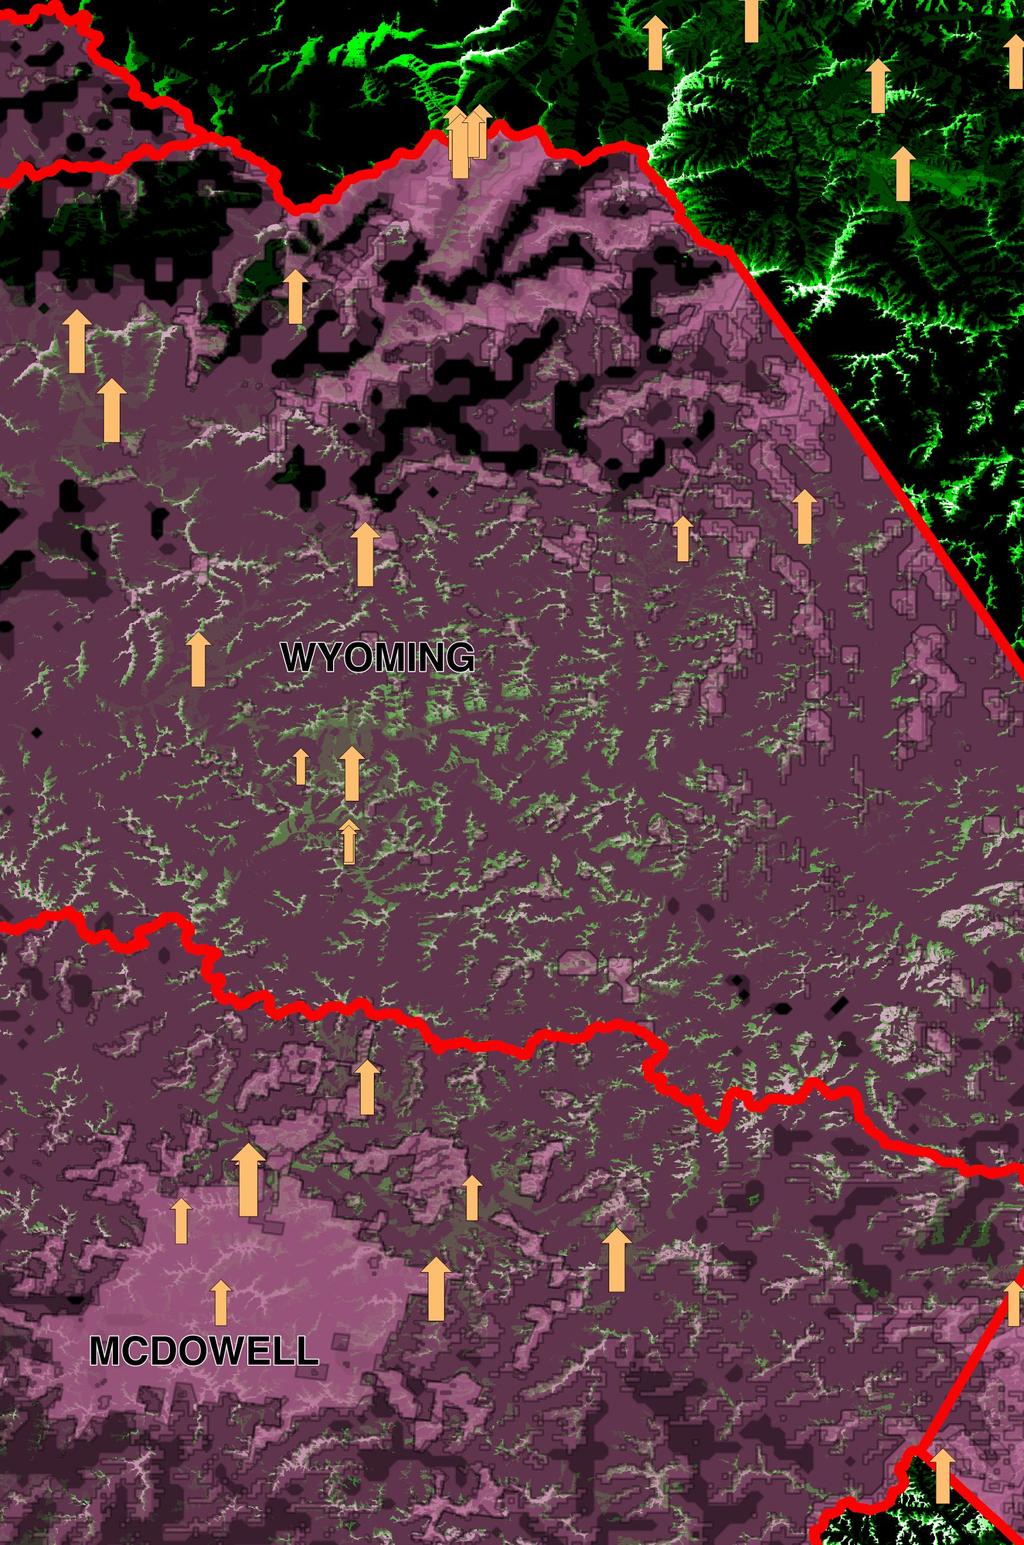 Coverage Analysis Wireless Main data source: GeoTel Coverage polygons by provider and spectrum (purple transparent polygons, right) Data validation: Elevation data from USGS